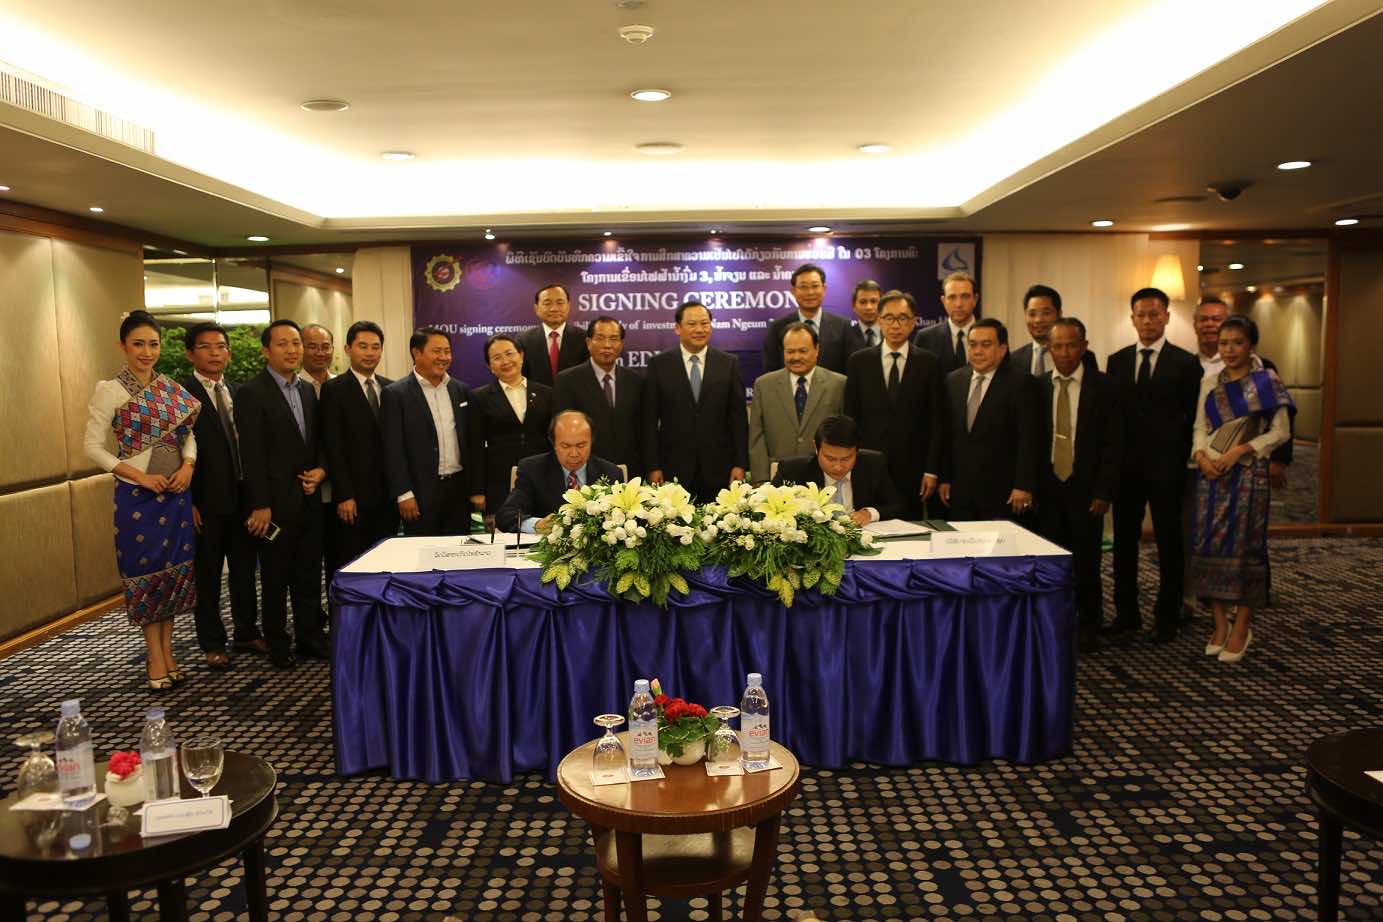 SIGNING CEREMONY ON 17 JULY, 2017